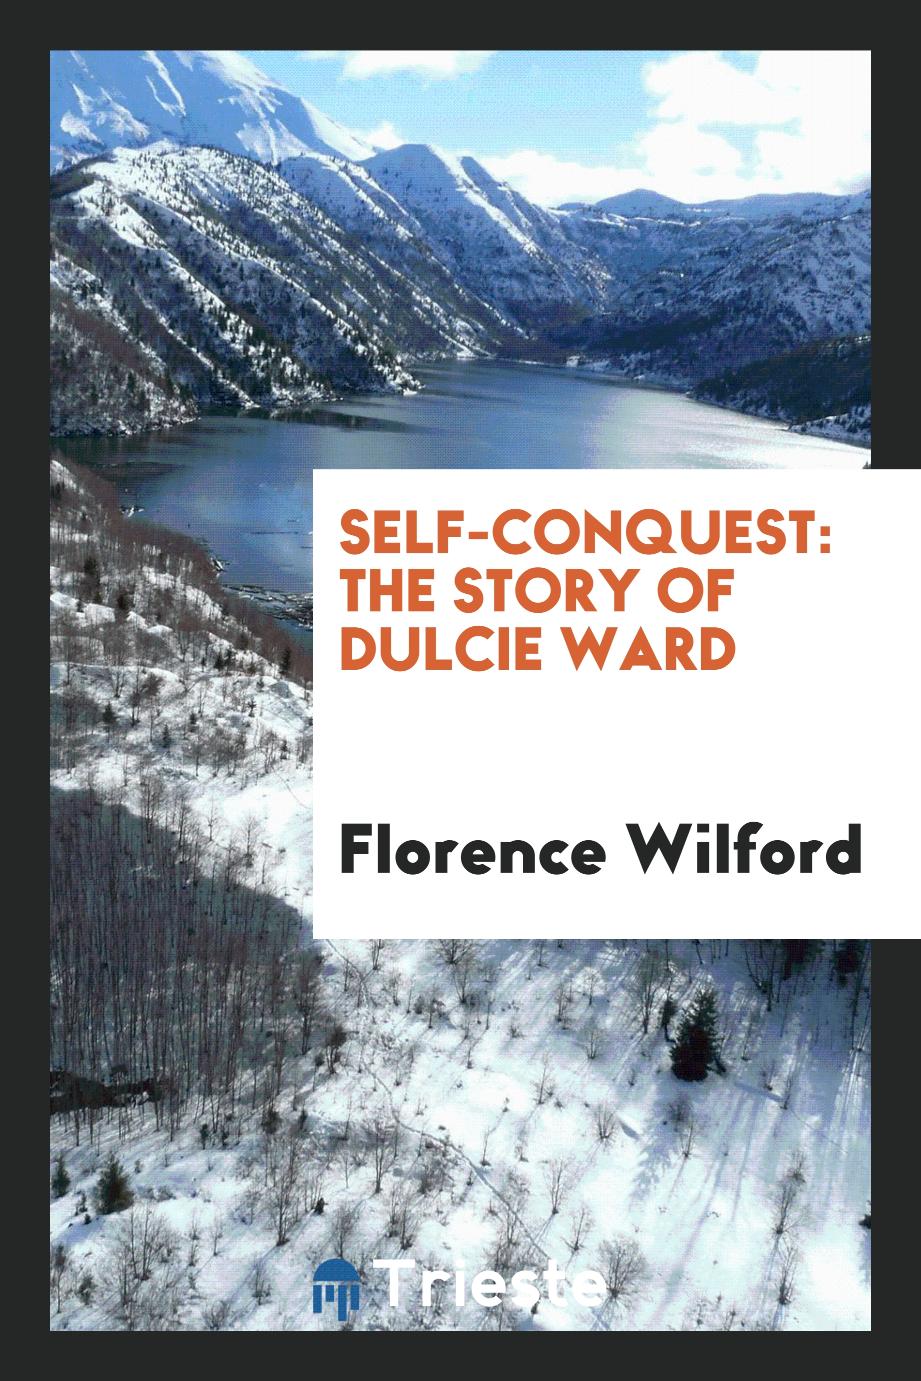 Self-Conquest: The Story of Dulcie Ward